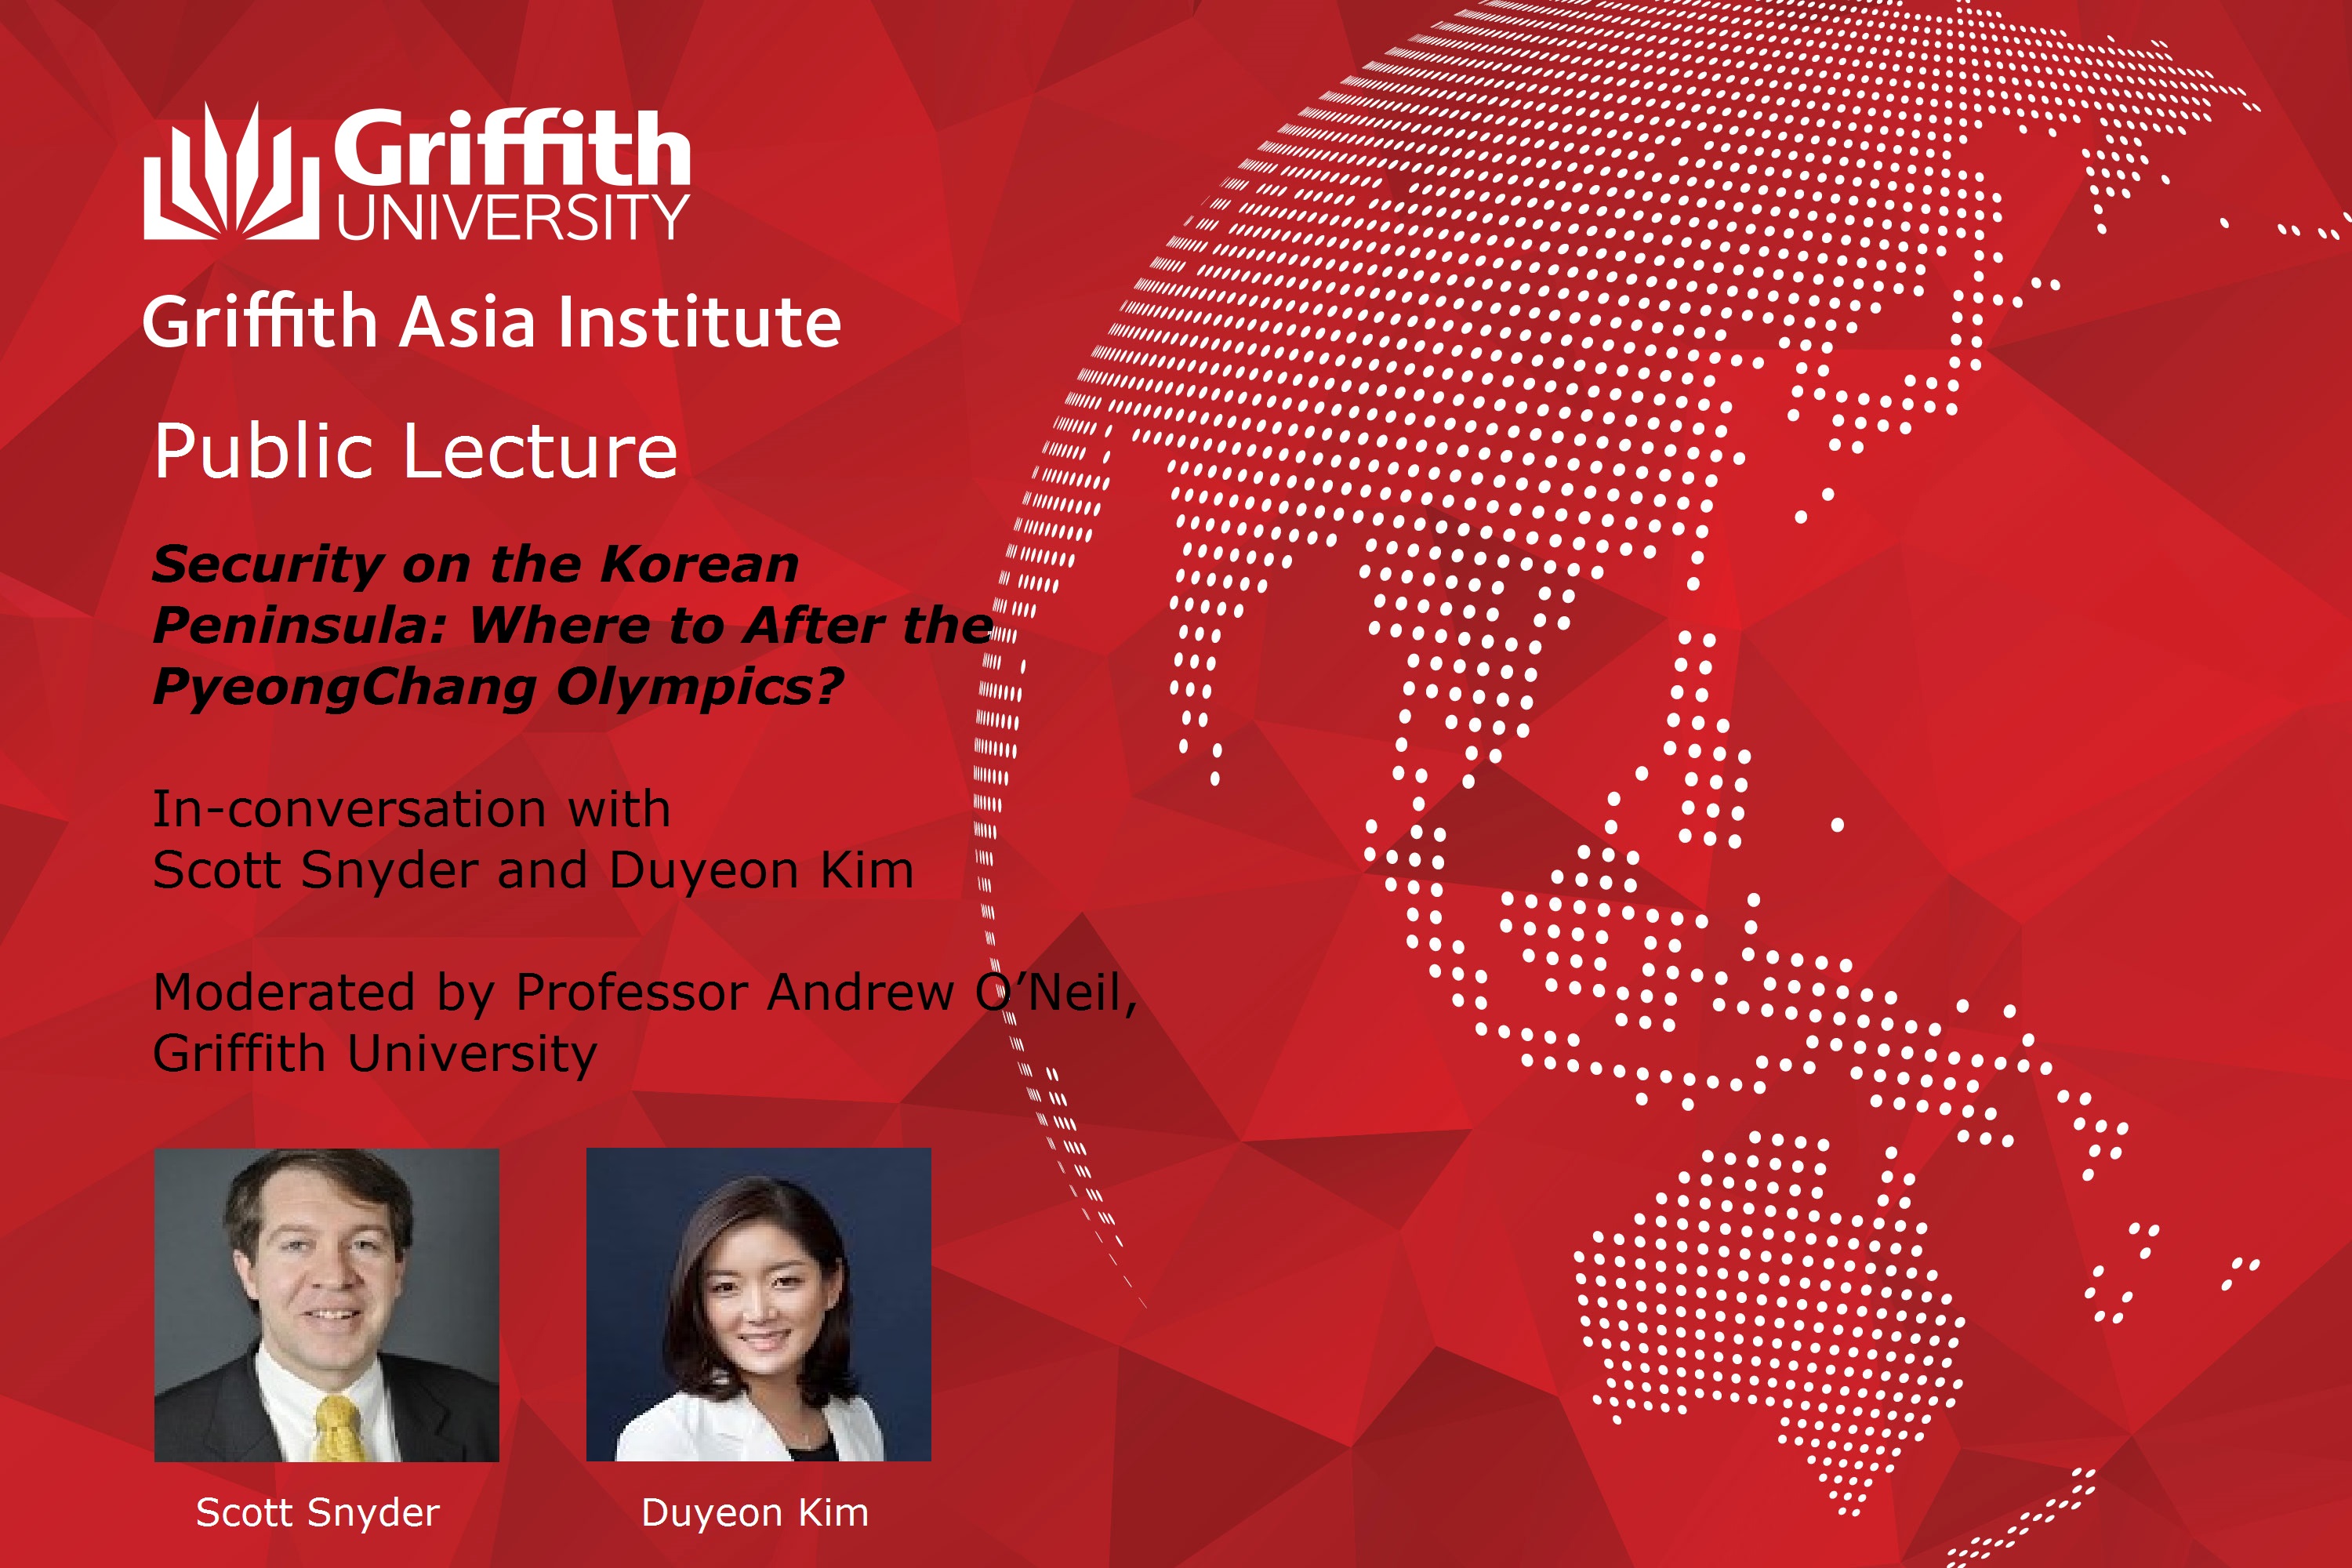 Griffith Asia Institute - Public Lecture: Security on the Korean Peninsula: Where to After the PyeongChang Olympics?